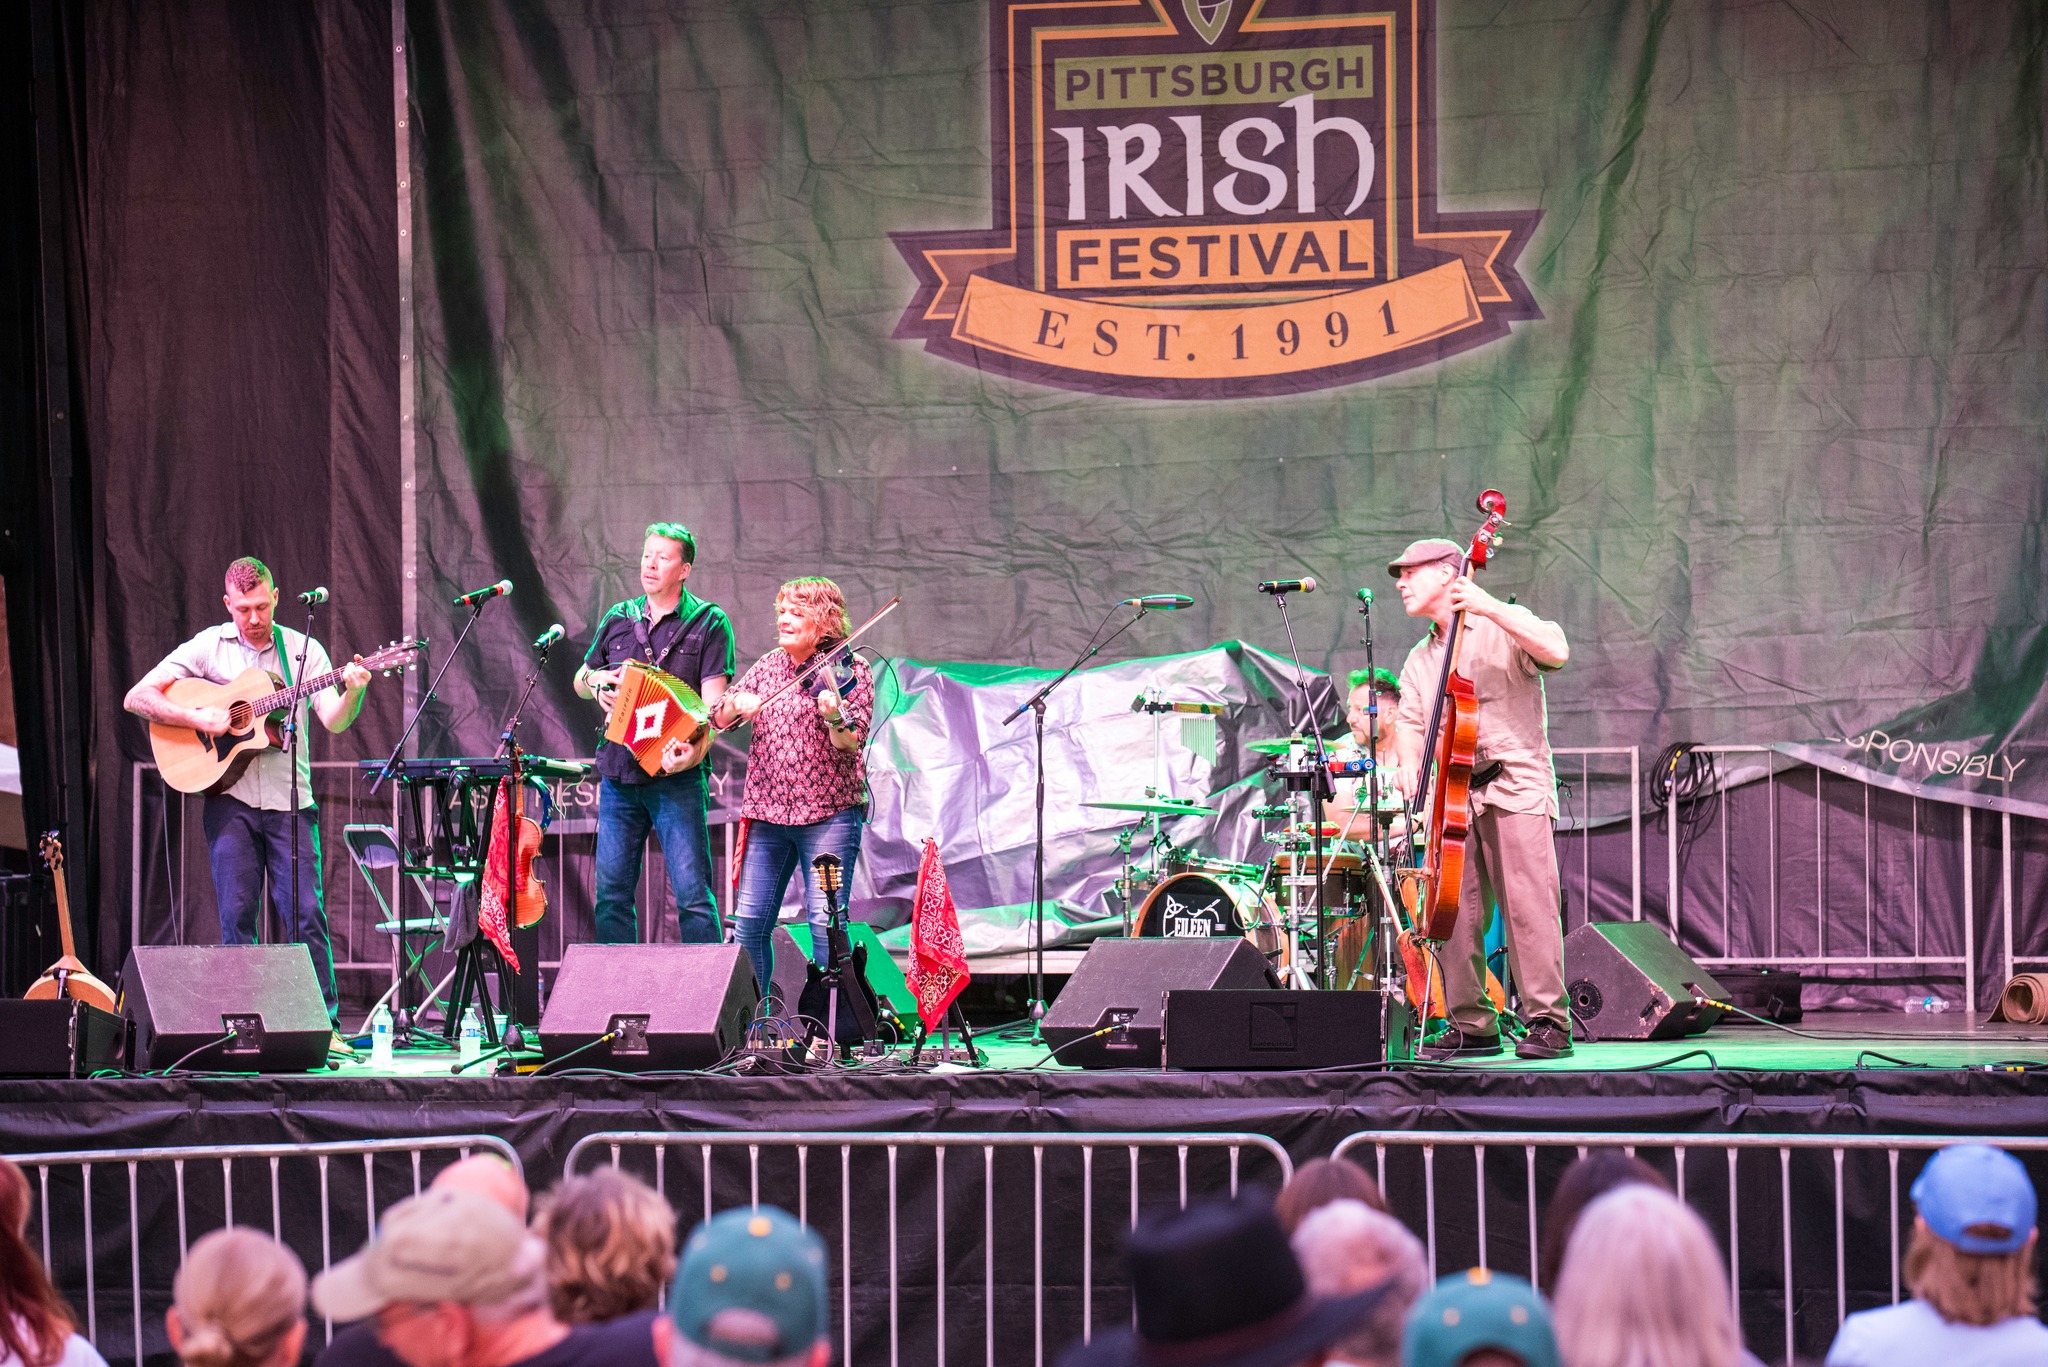 band performing on stage at Irish festival